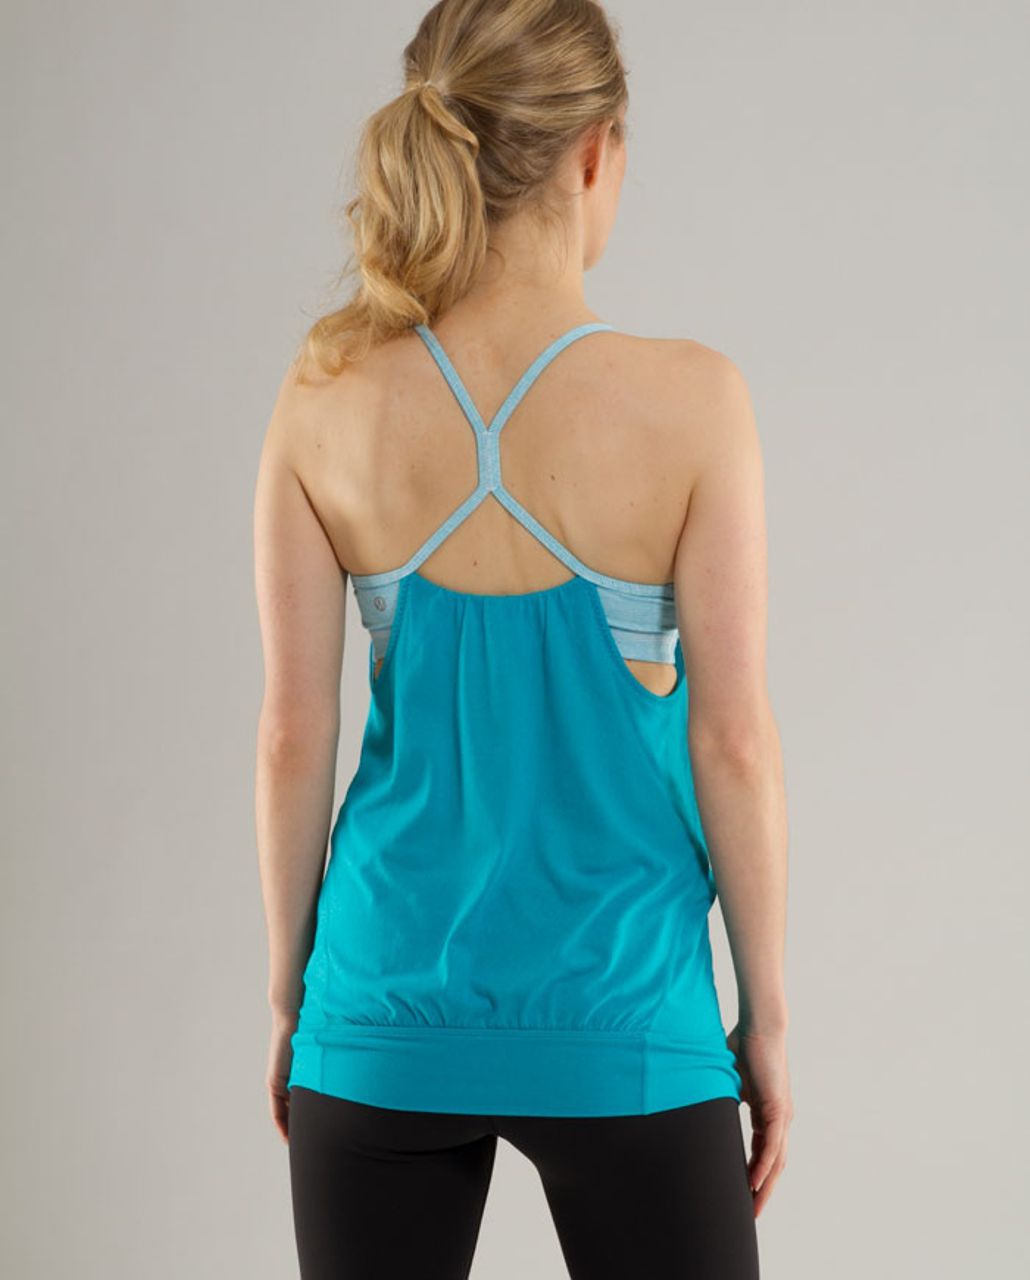 Lululemon Let it Loose Tank Grey and Black Women's Active Sports